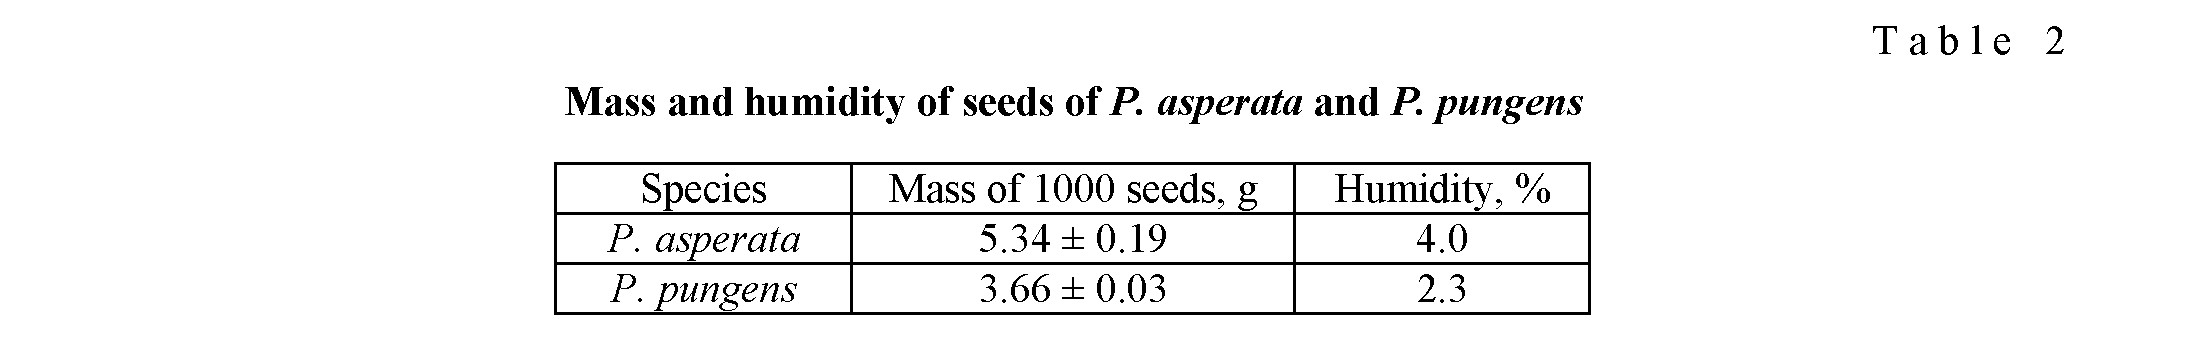 Effects of carbohydrate content in seeds on the germination and viability after cryopreservation